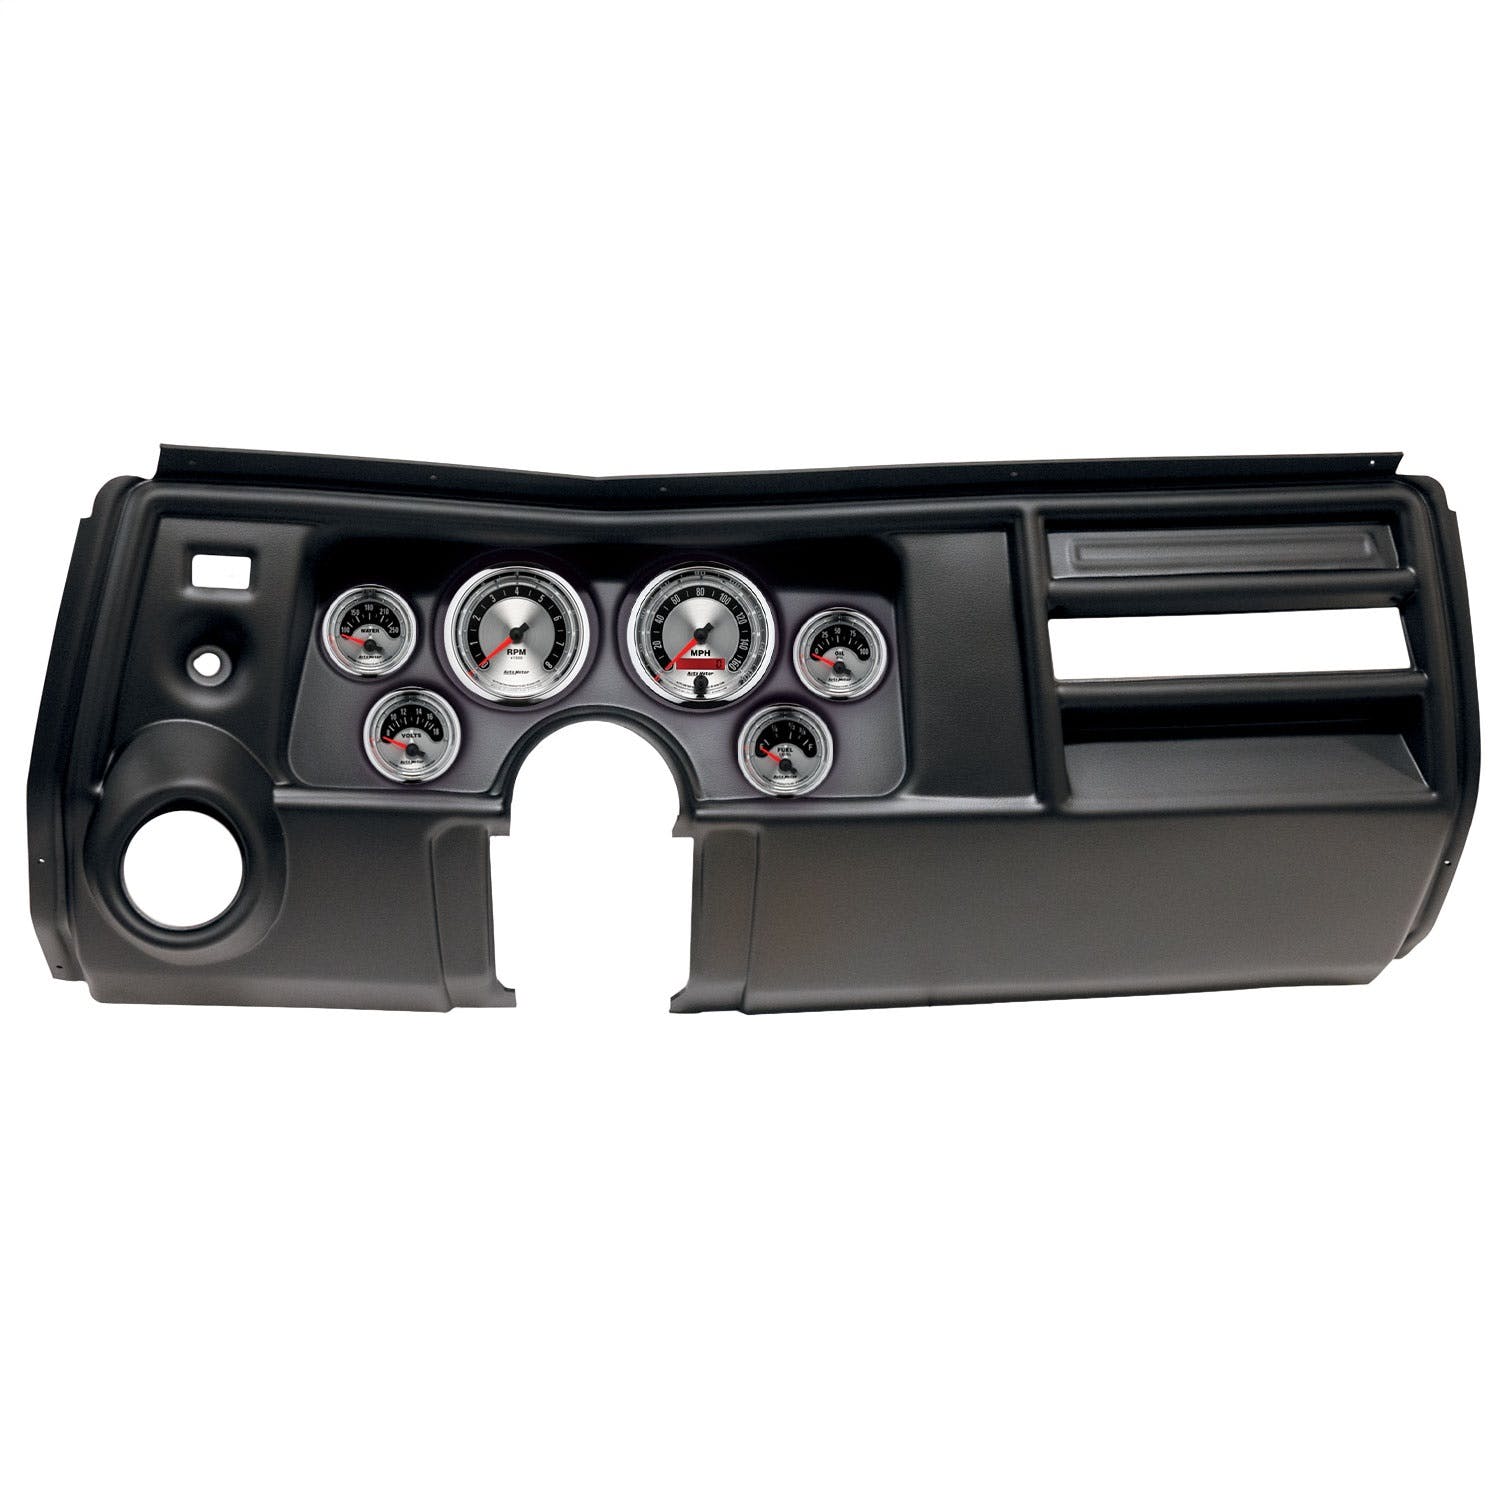 AutoMeter Products 2909-01 6 Gauge Direct-Fit Dash Kit, Chevy Chevelle Vent 69, American Muscle